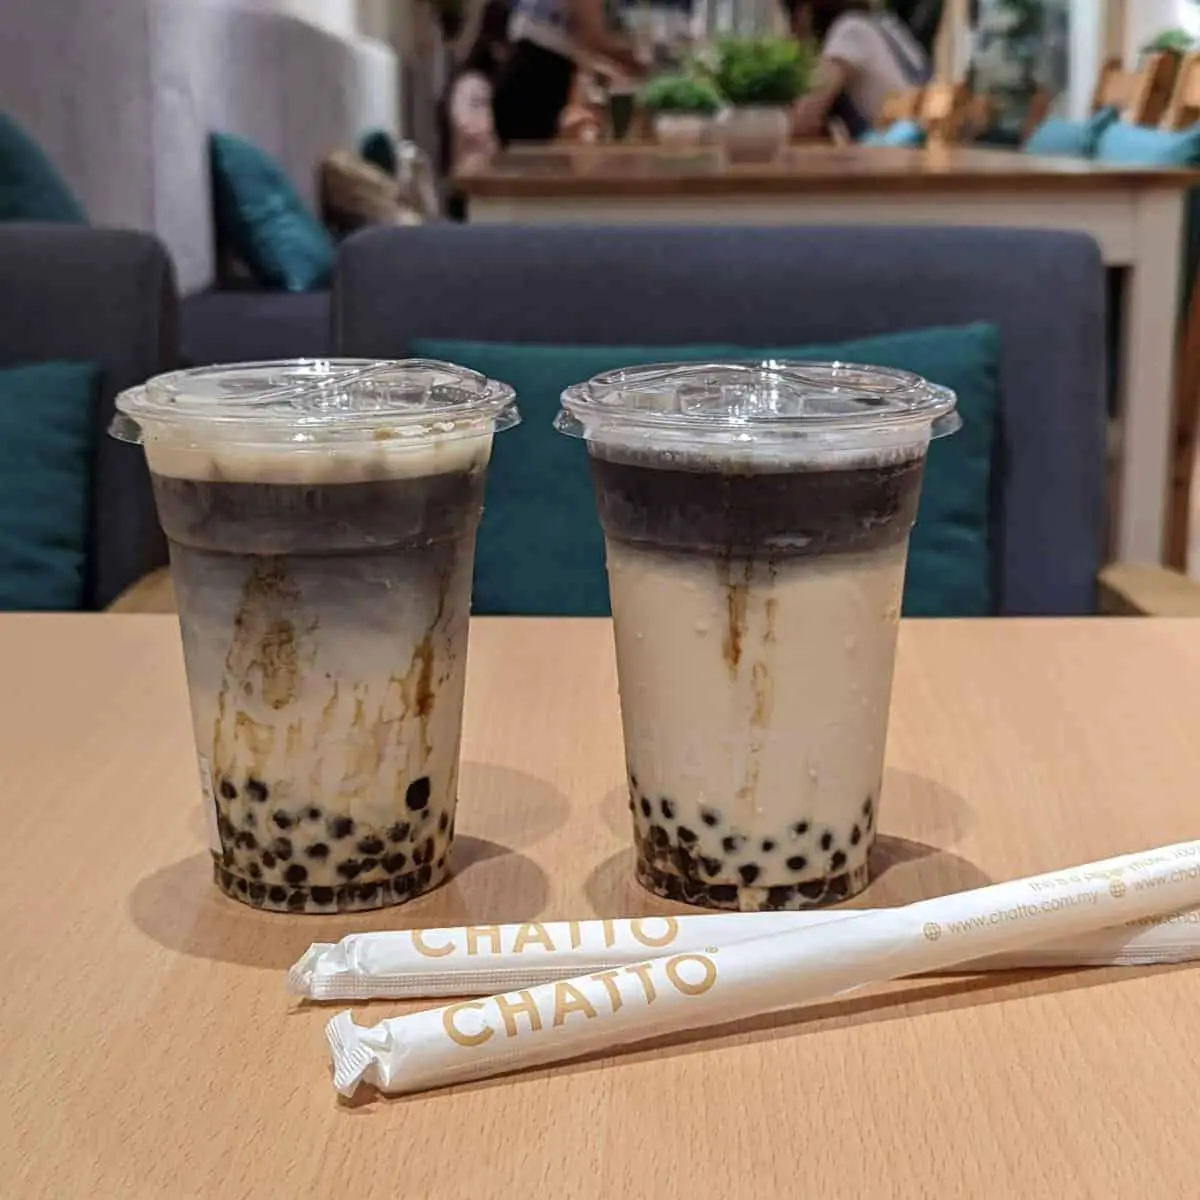 Drink bubble tea while playing Jenga at Chatto